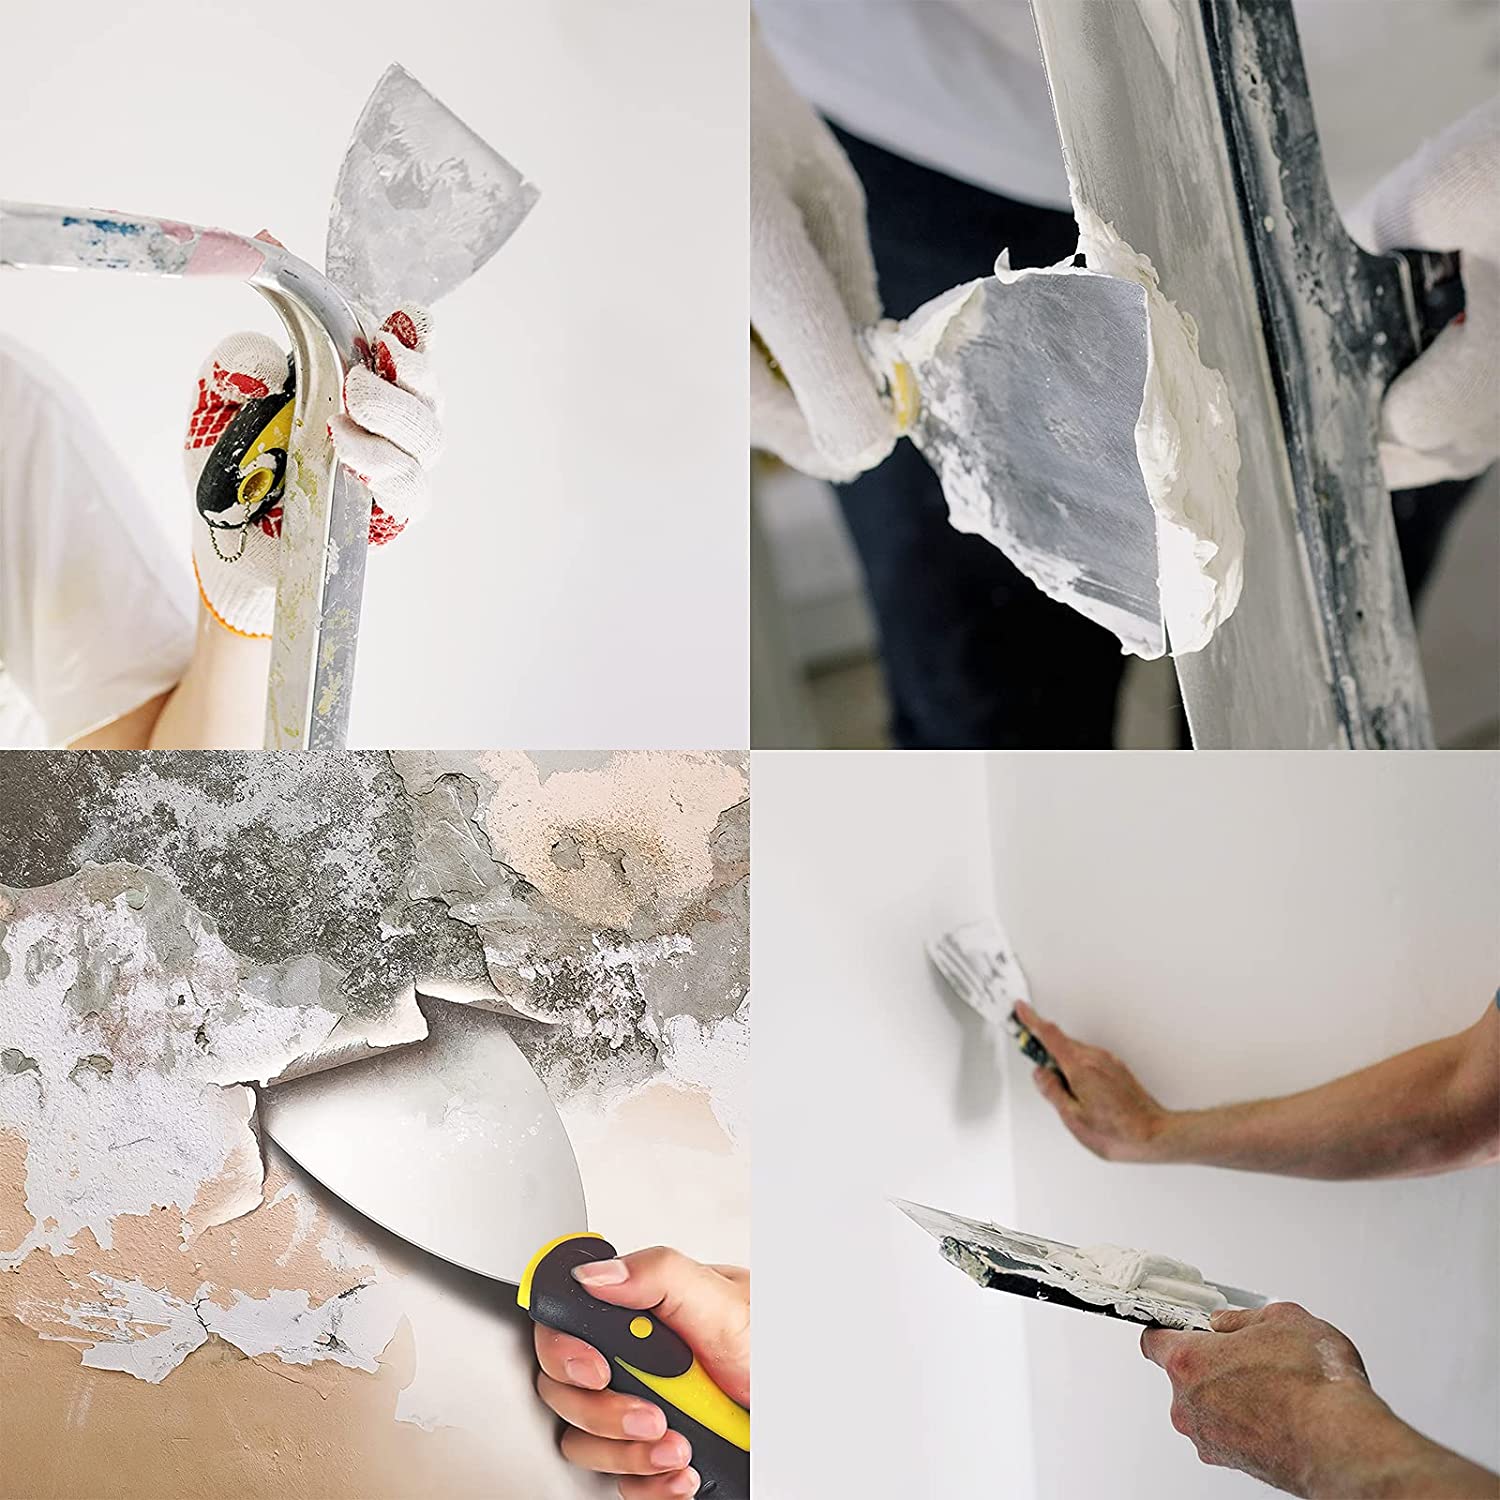 https://www.elehand.com/3-inches-con beton-drywall-cleaning-putty-knife-tool-product/